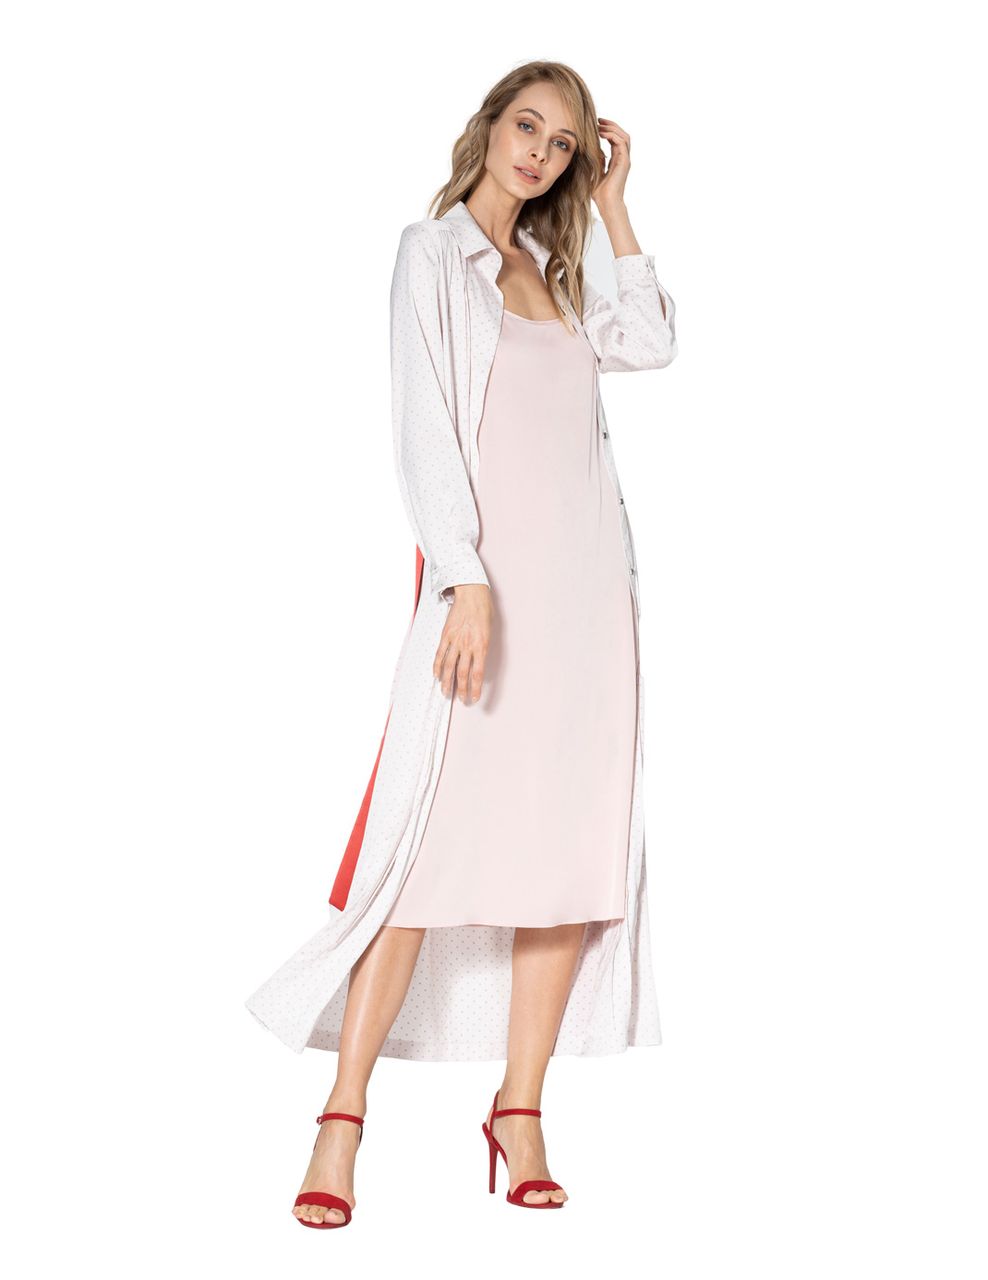 Dress-shirt for the city and relaxation from a comfortable, flowing artificial satin with a polka dot pattern. Fold-up collar, set-in sleeve, with cuff on sewing buttons. In addition there is a removable belt and a combination dress on the straps.